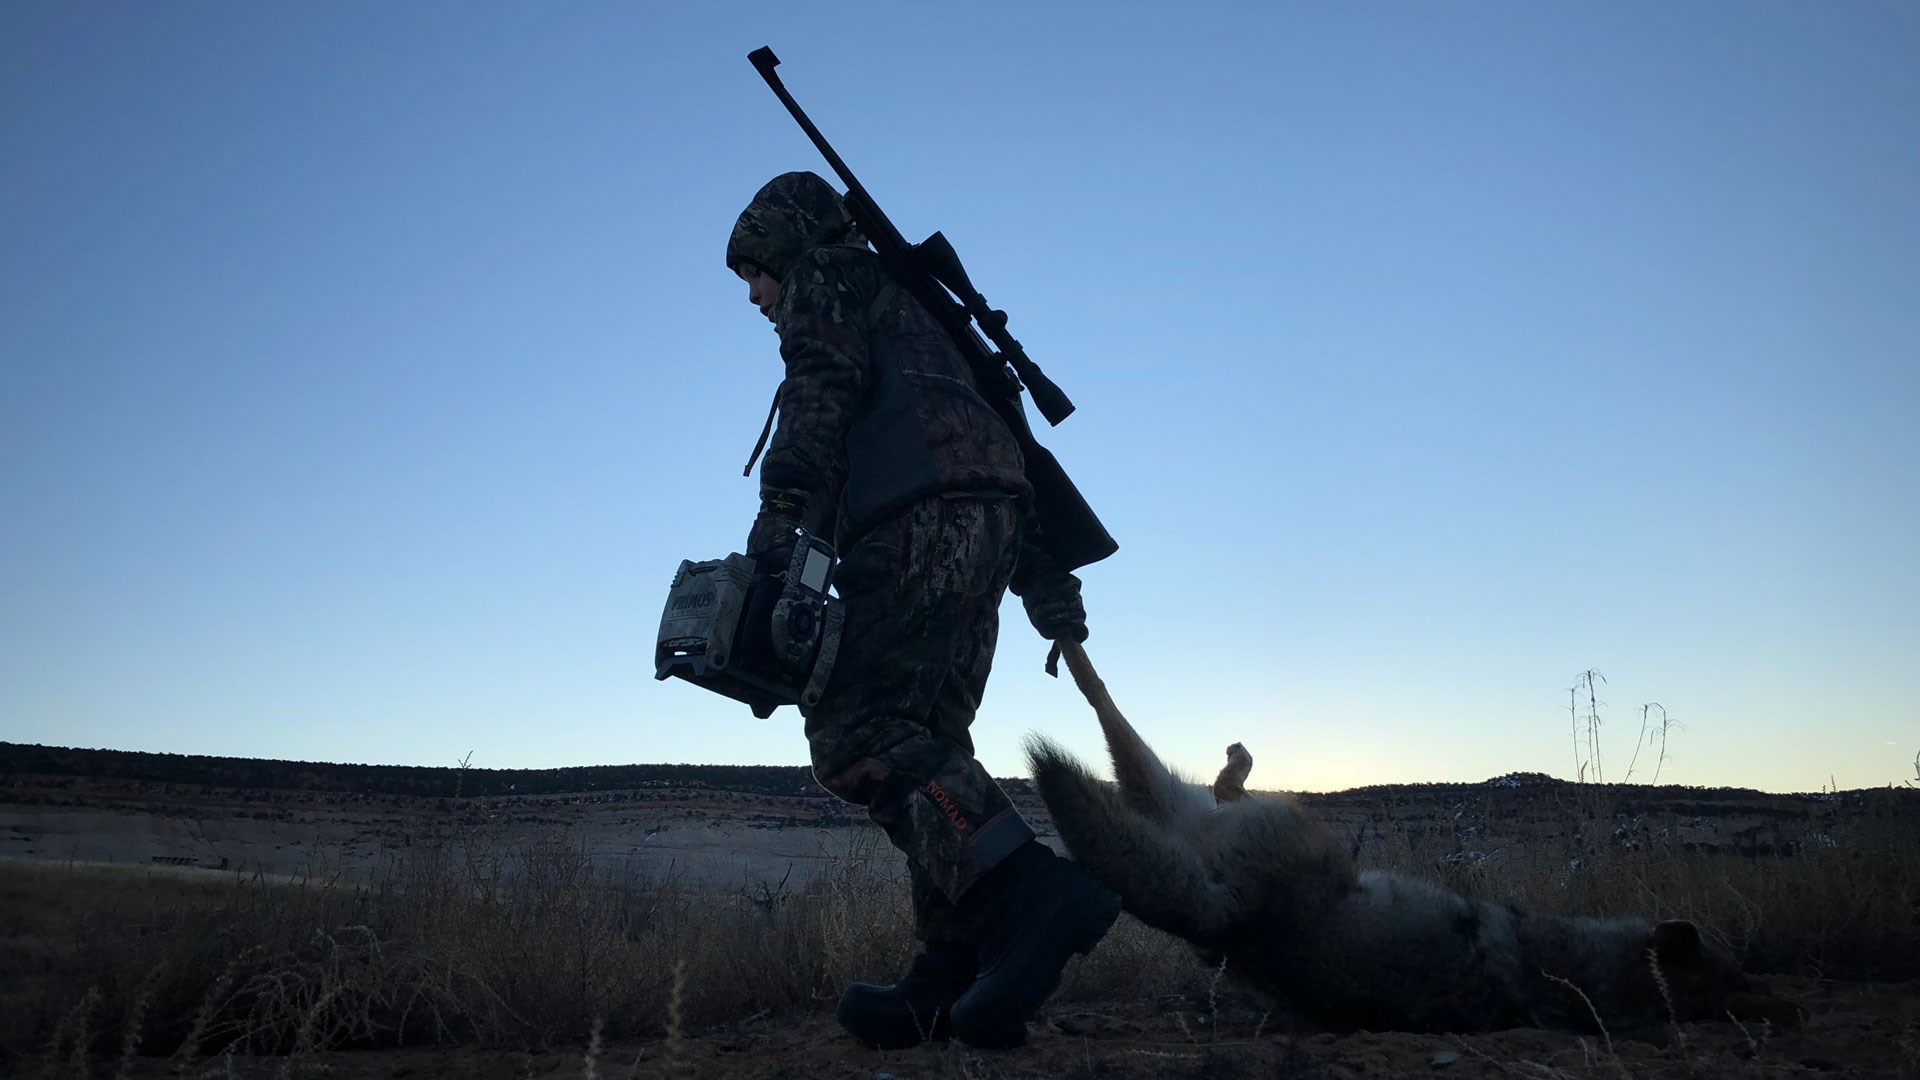 A man drags a coyote at dusk